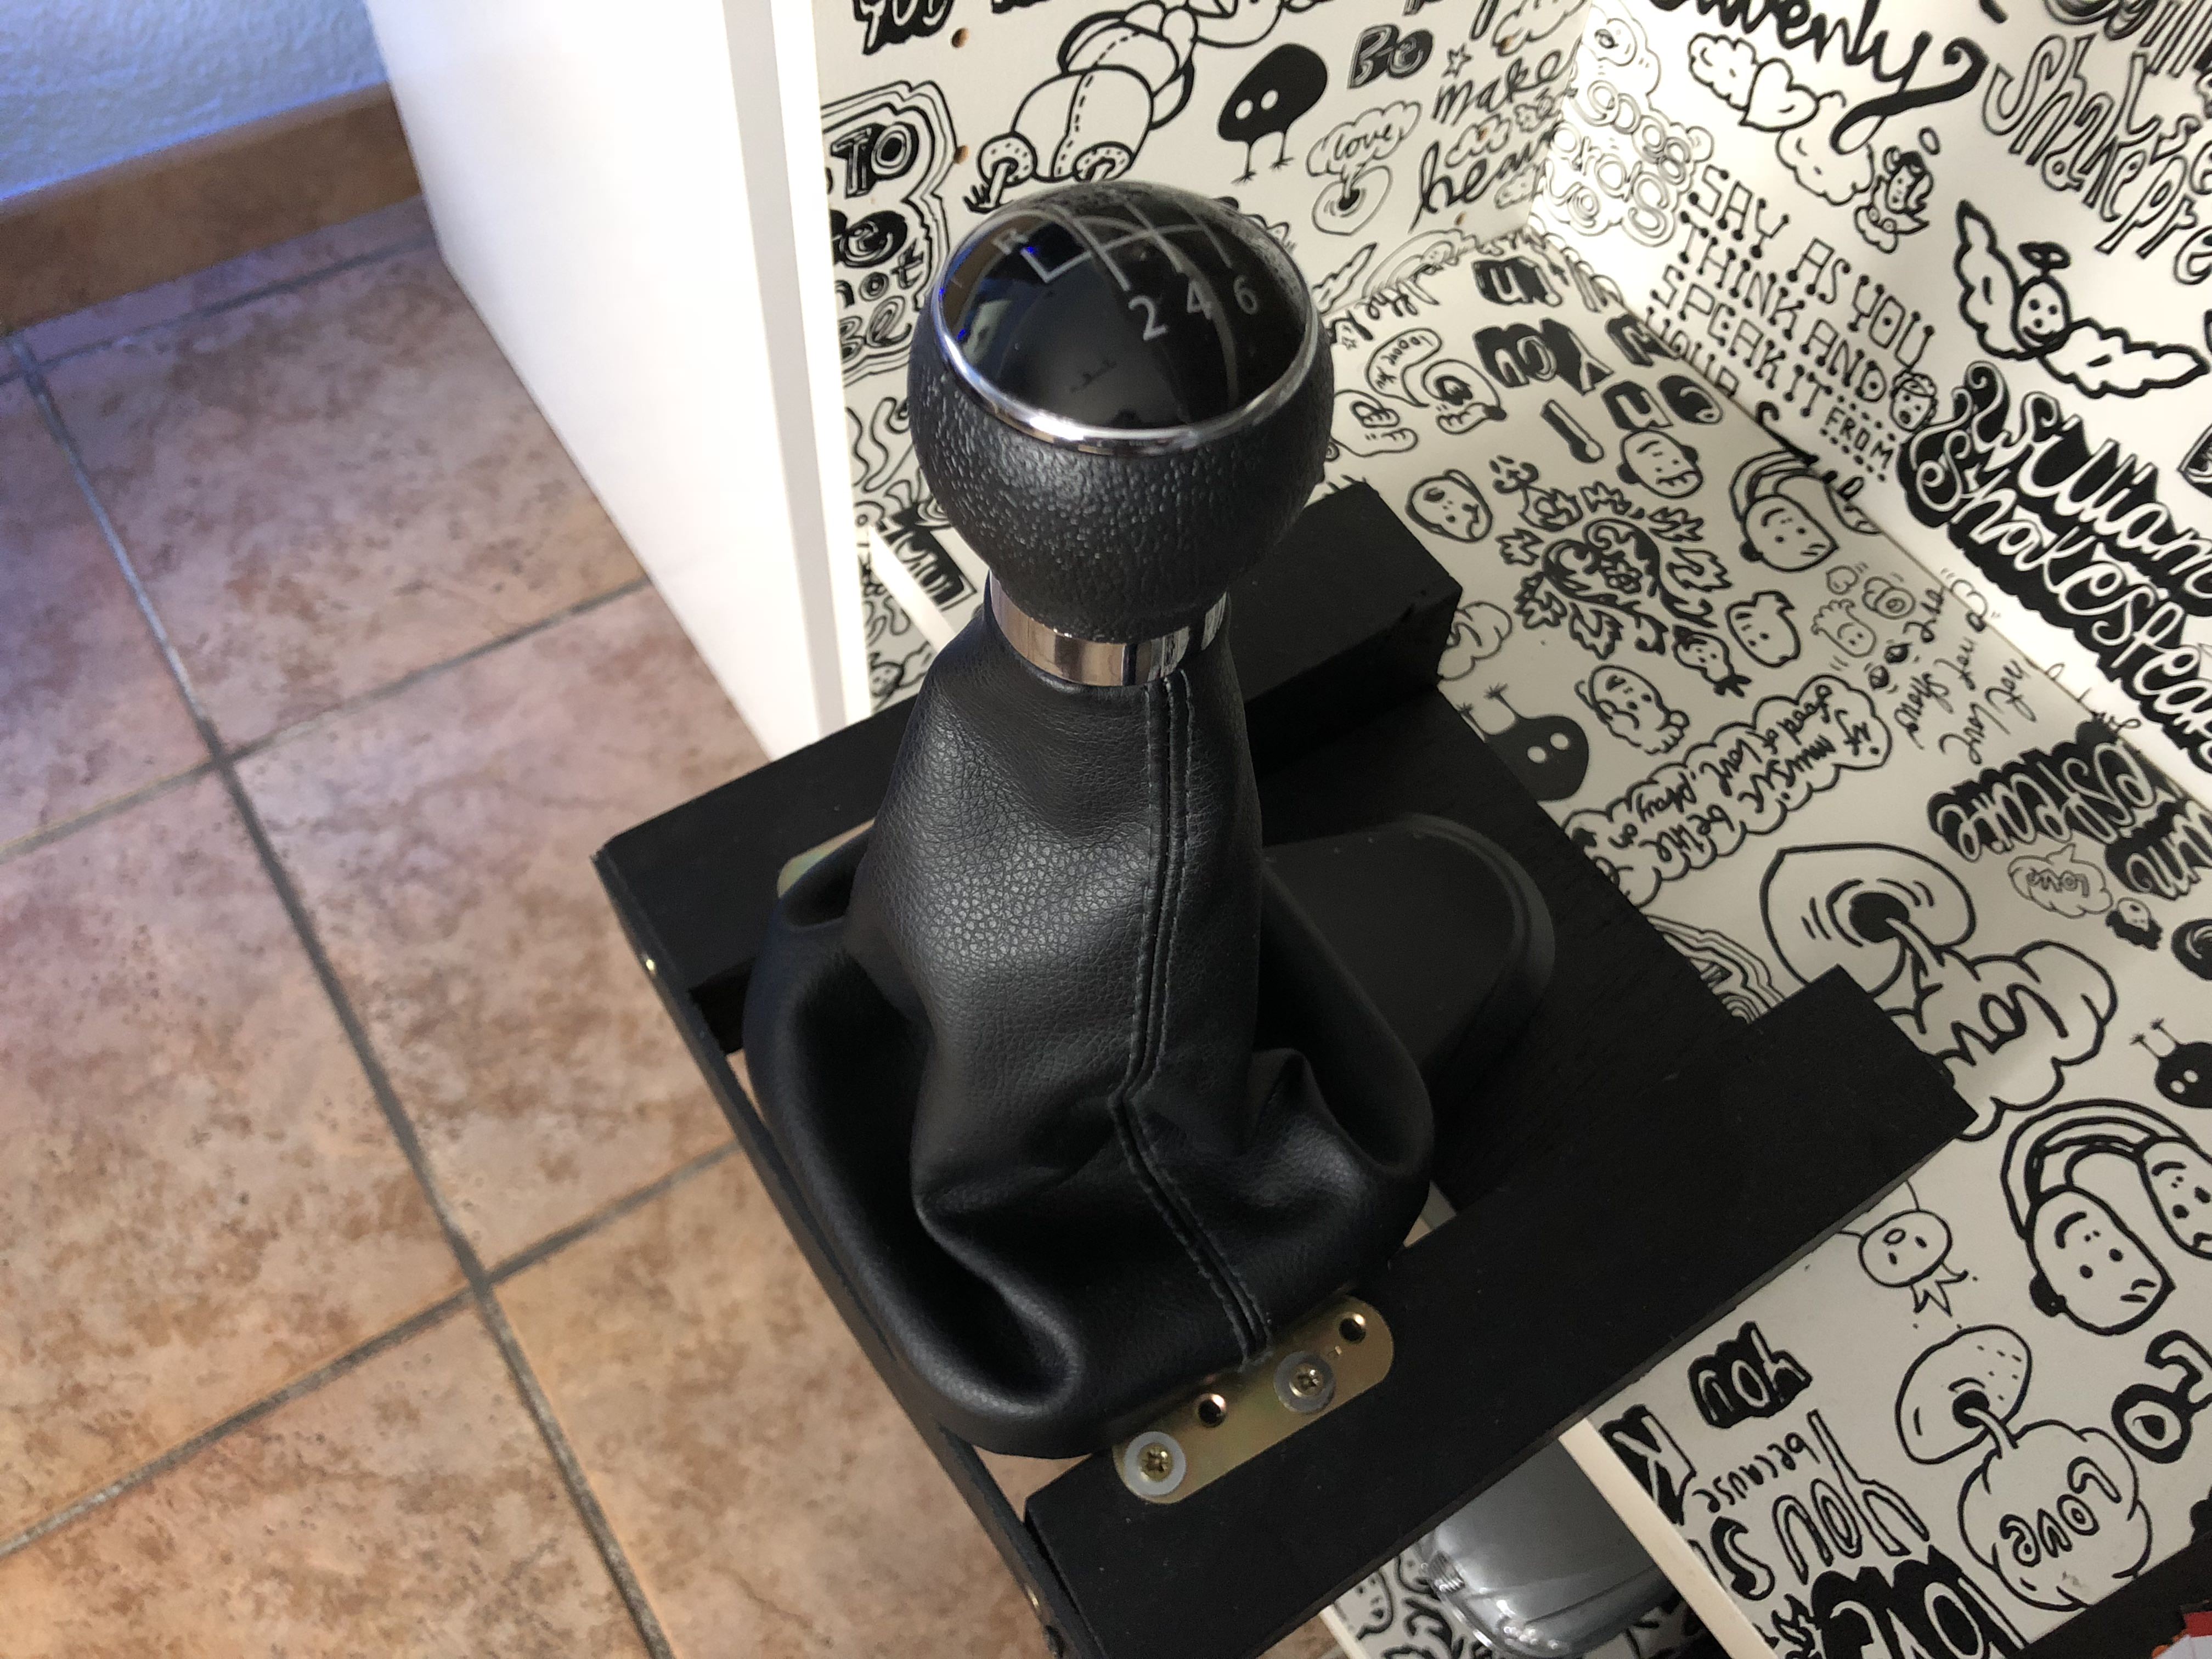 Thrustmaster TH8A Shifter Review – GTPlanet